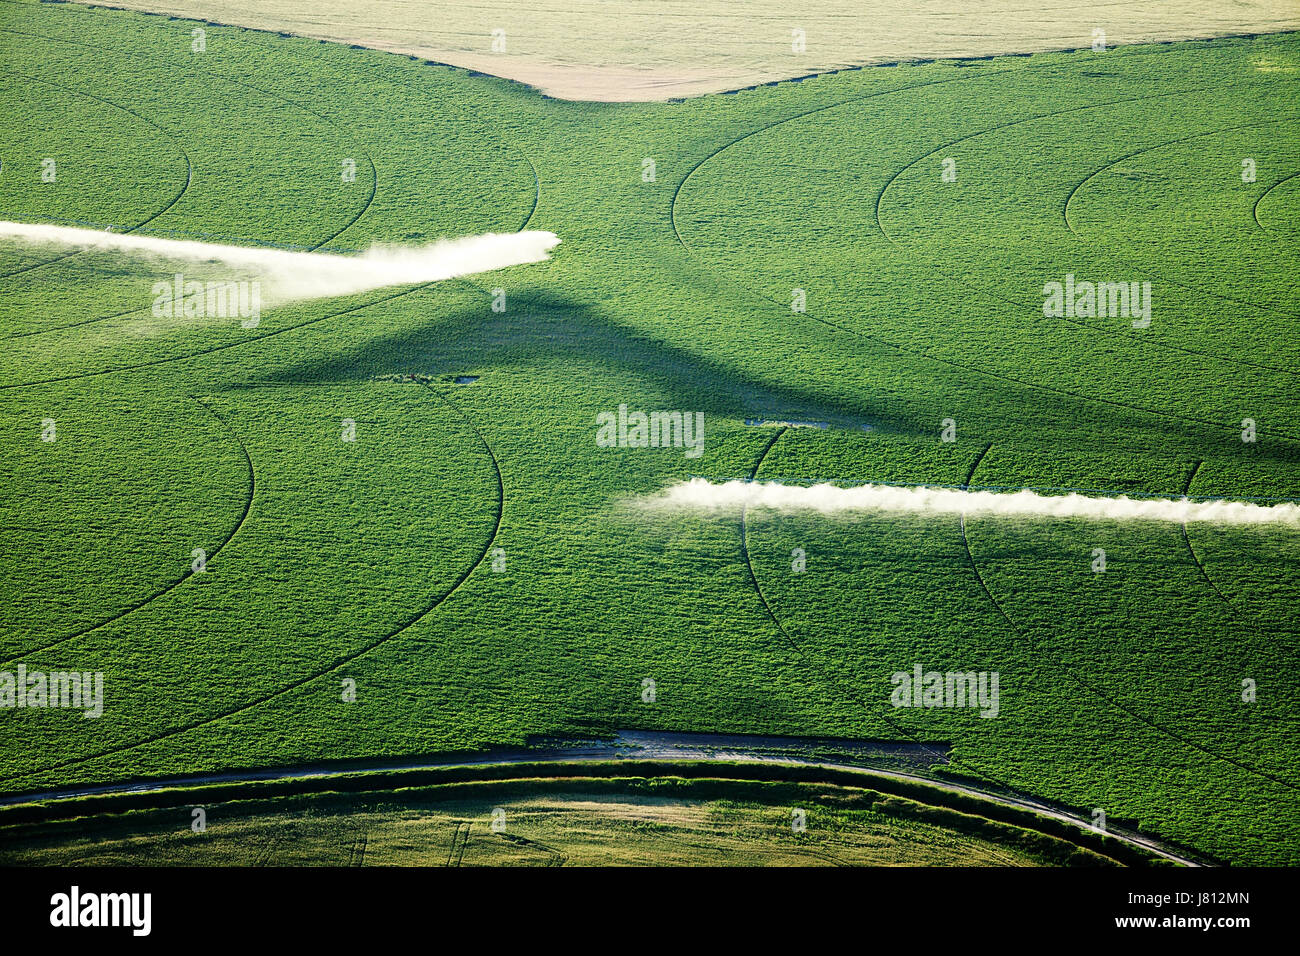 An aerial view of farmland and pivot sprinklers watering the fields. Stock Photo